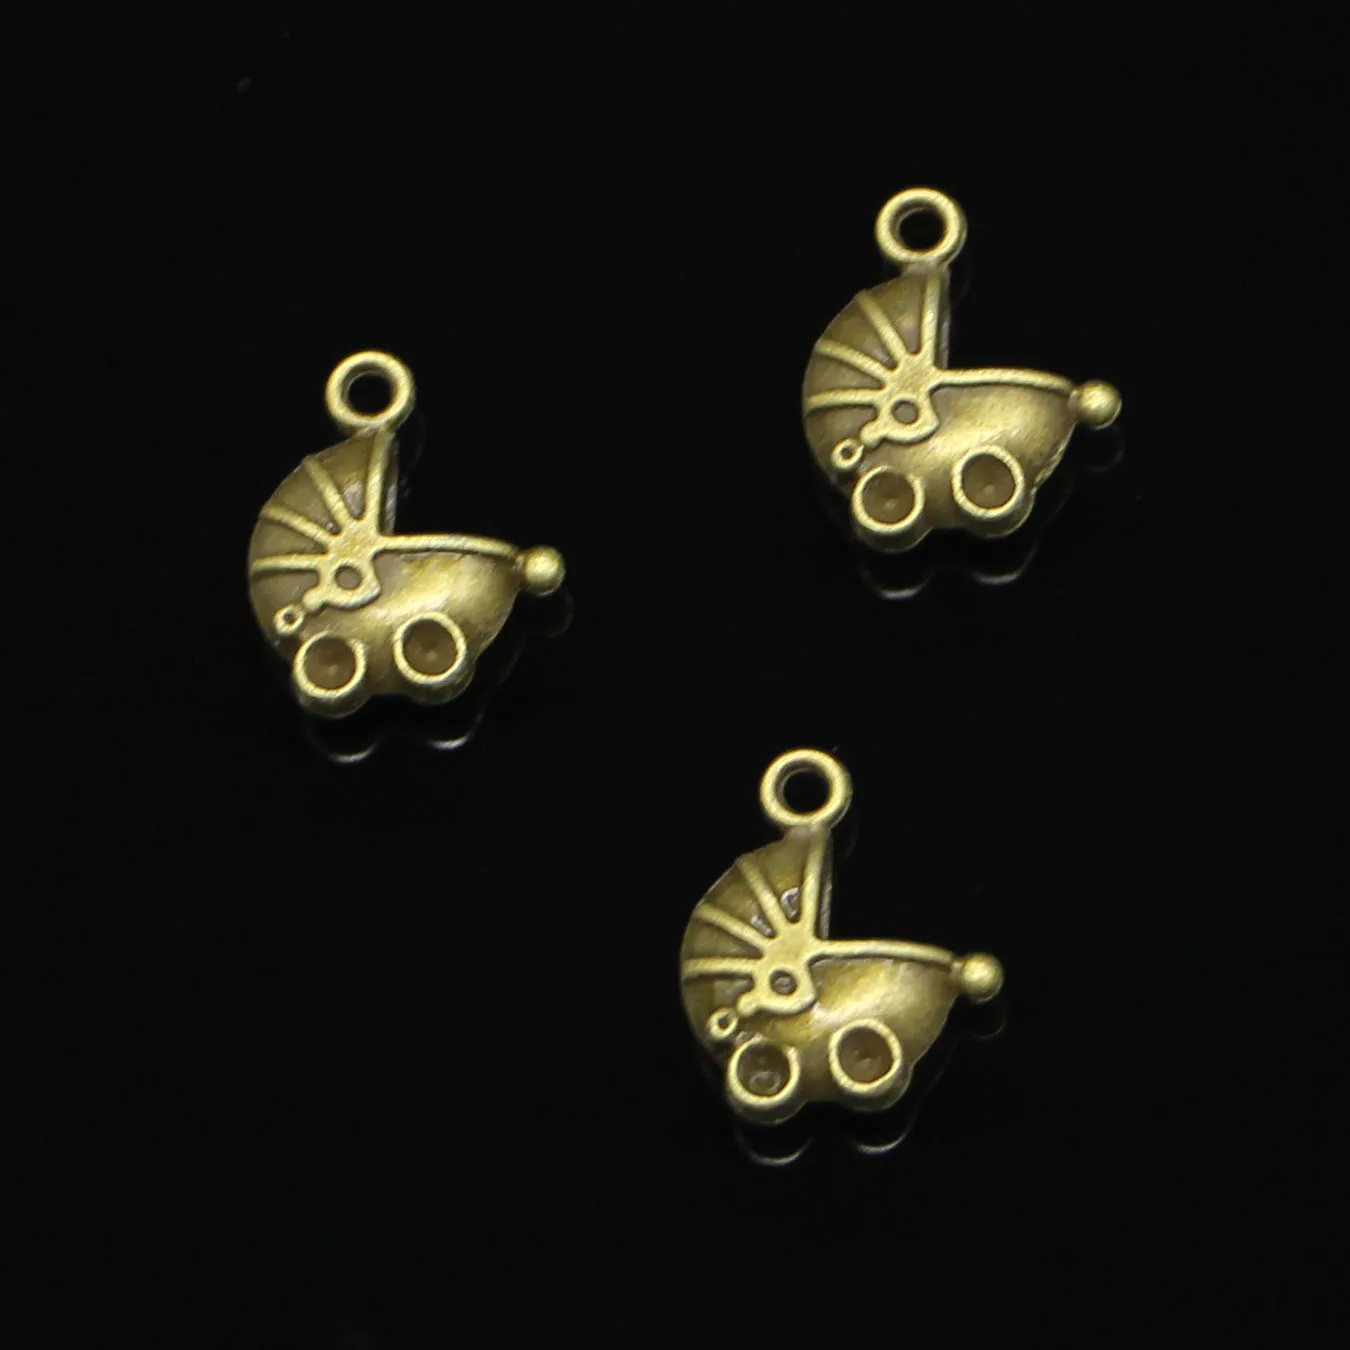 Zinc Alloy Charms Antique Bronze Plated 3D baby carriage buggy pram Charms for Jewelry Making DIY Handmade Pendants 16 13mm261e